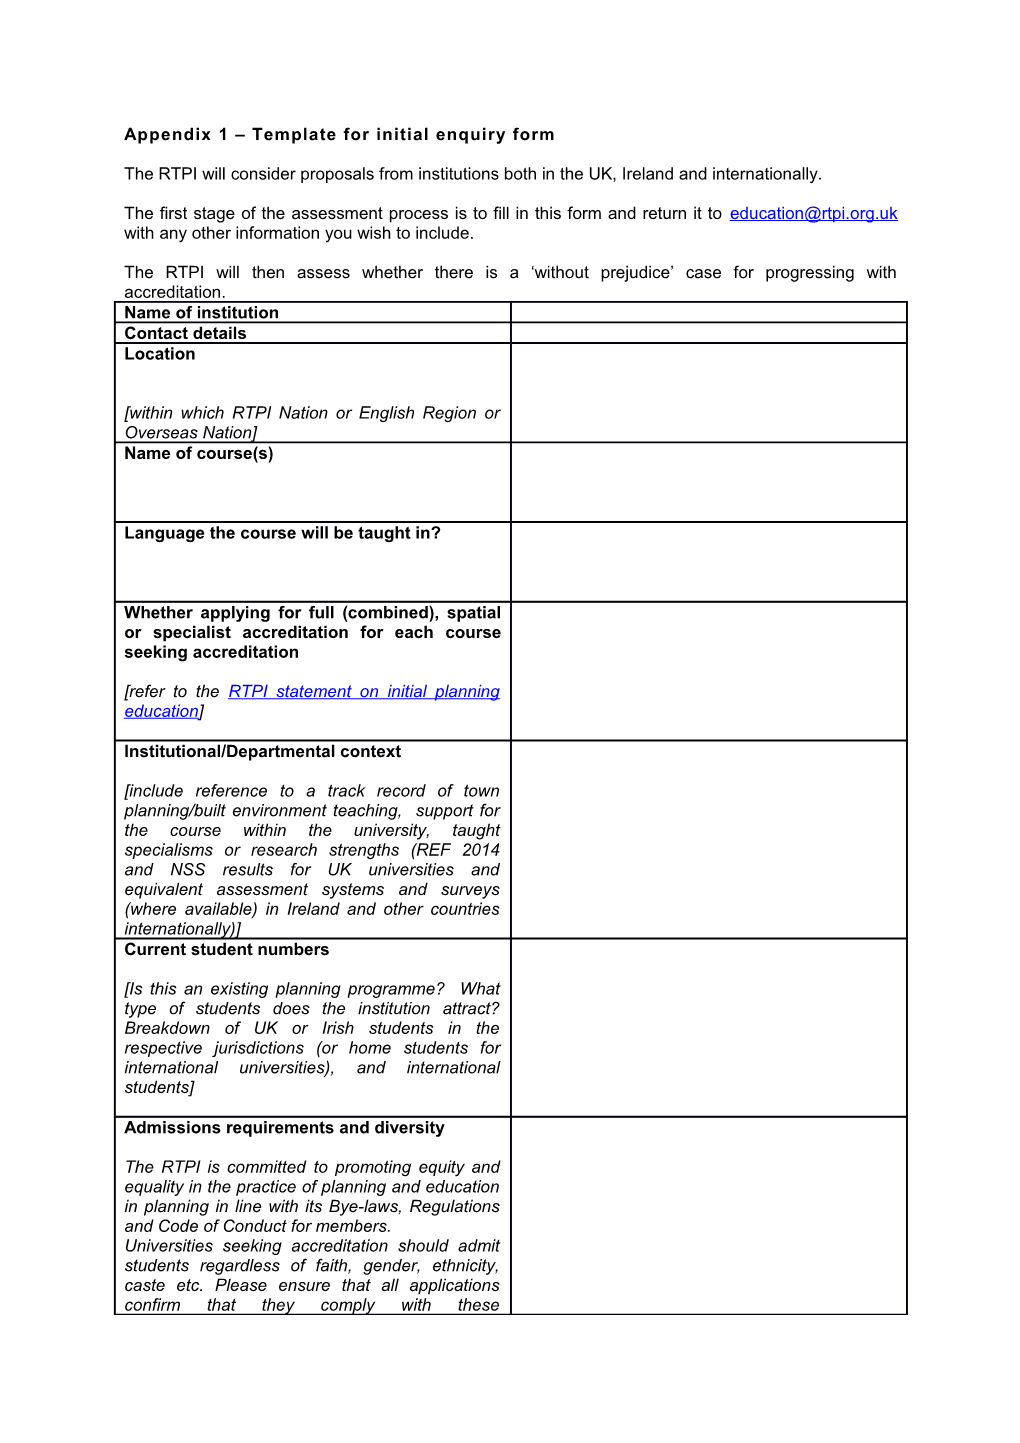 Appendix 1 Template for Initial Enquiry Form